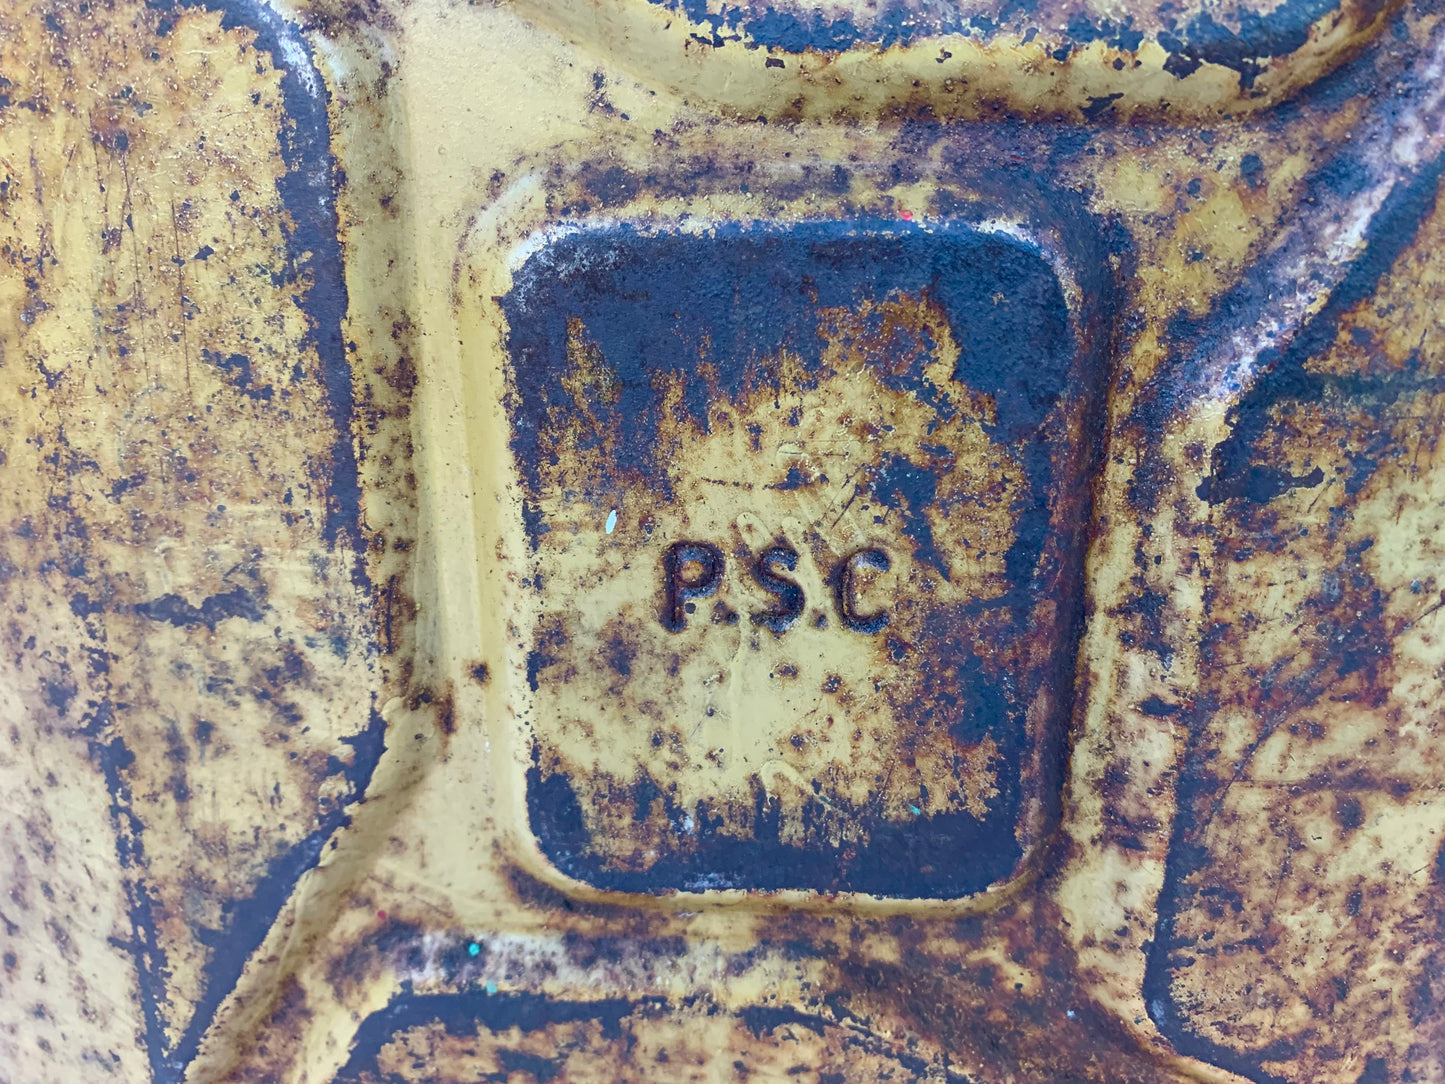 WW2 British Jerry Can dated 1943 from Normandy - Desert Rats.